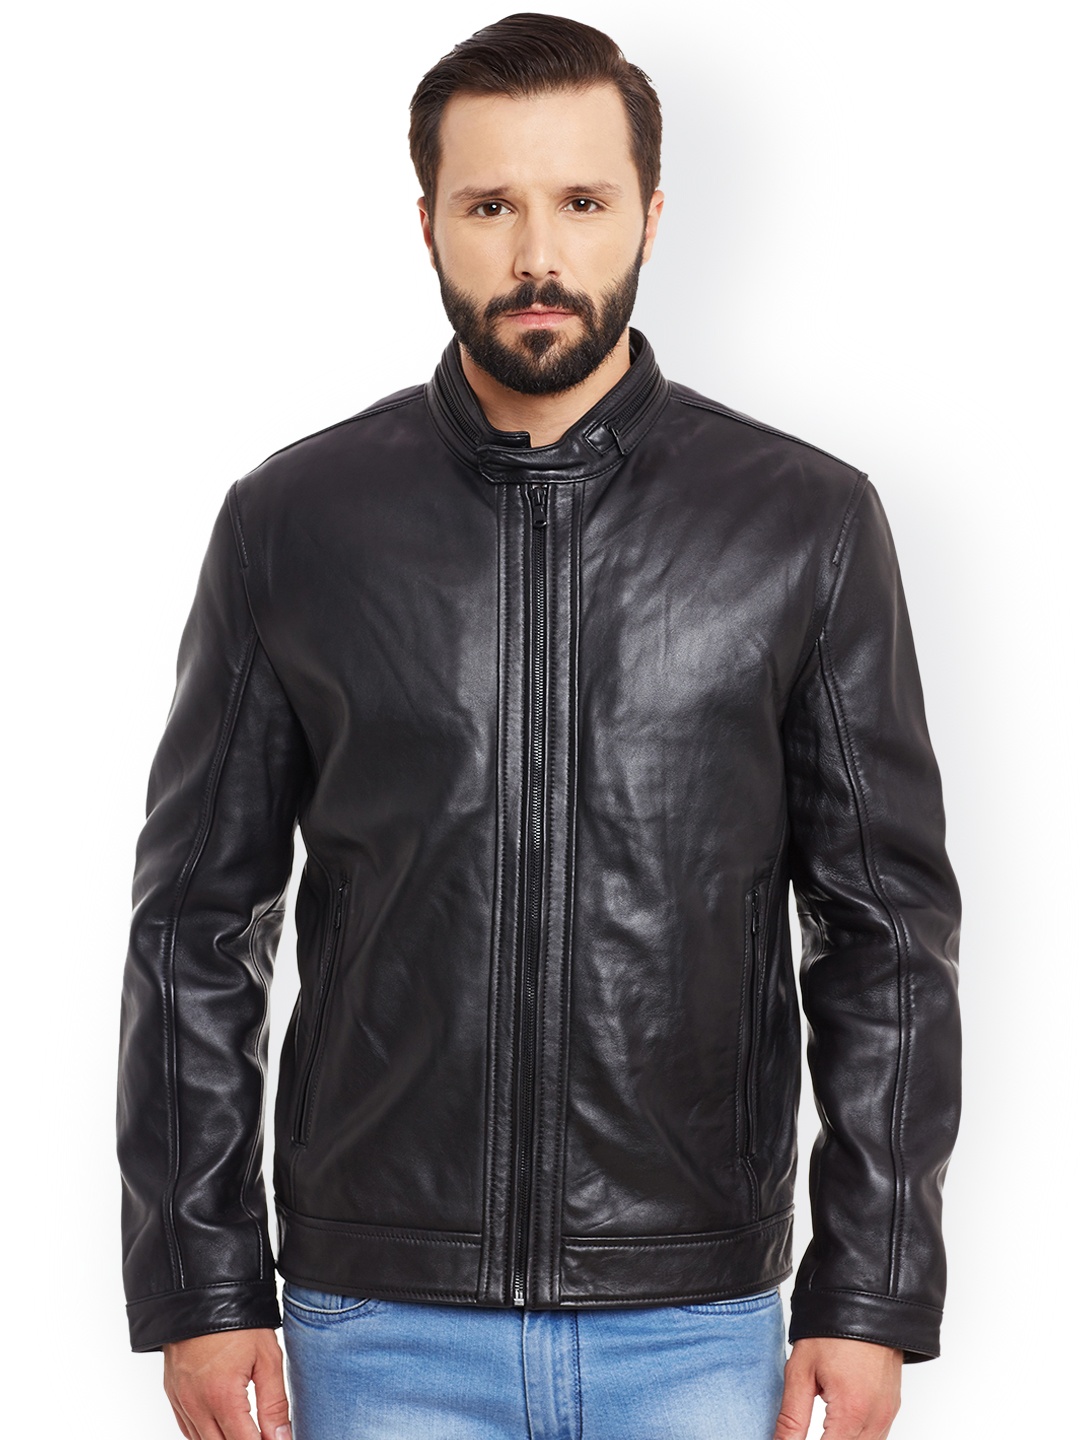 Justanned Black Leather Jacket price Myntra. Jackets Deals at Myntra ...